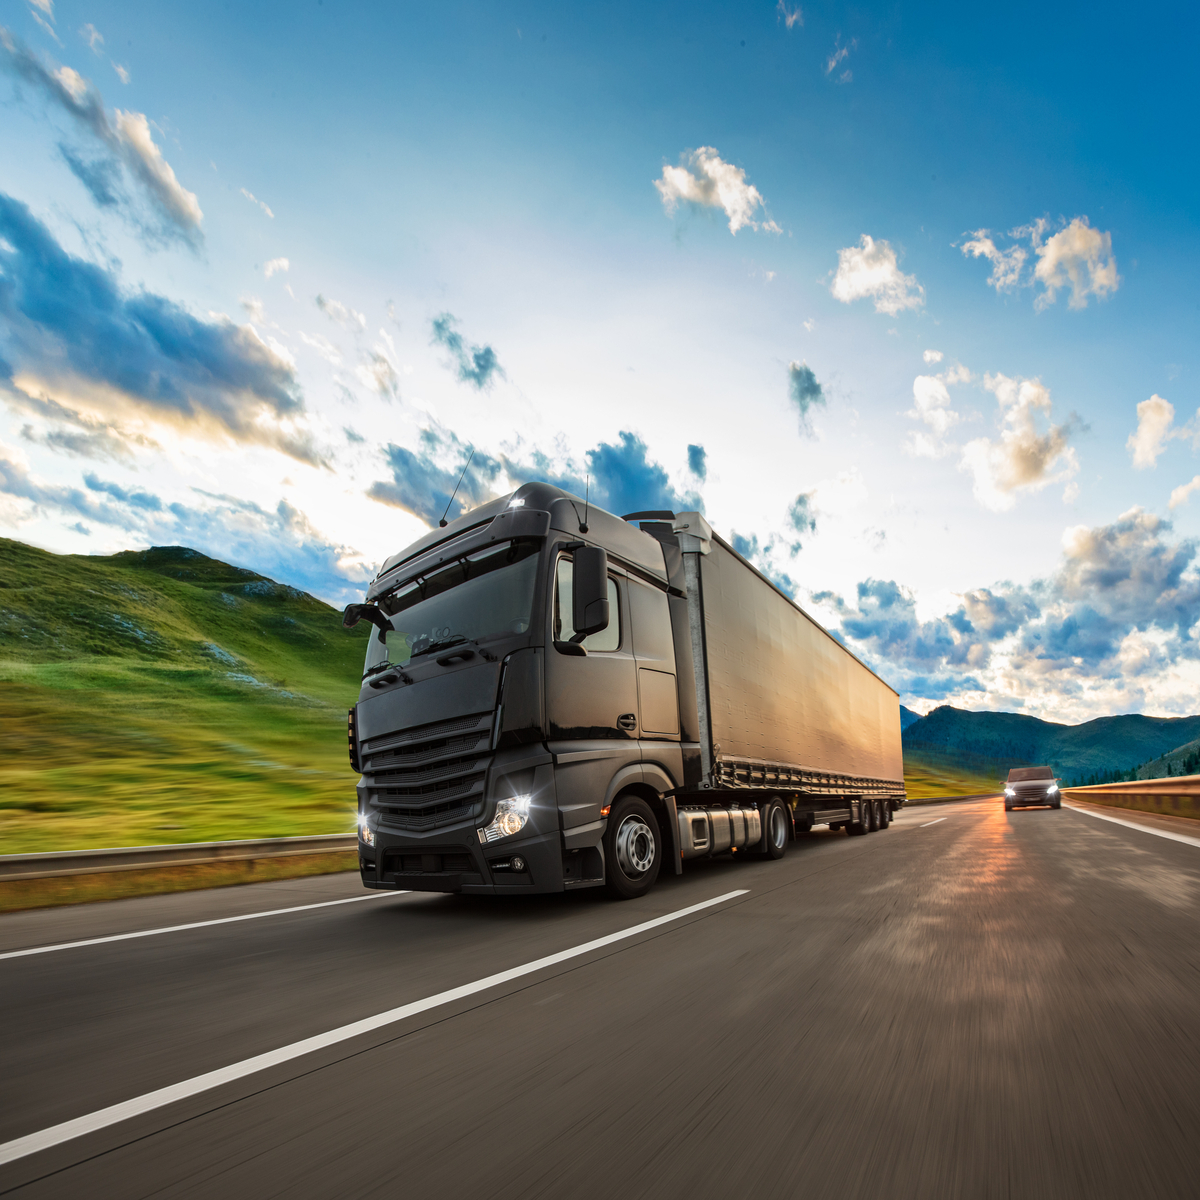 How Do I Find Truck Title Loans Near Me?